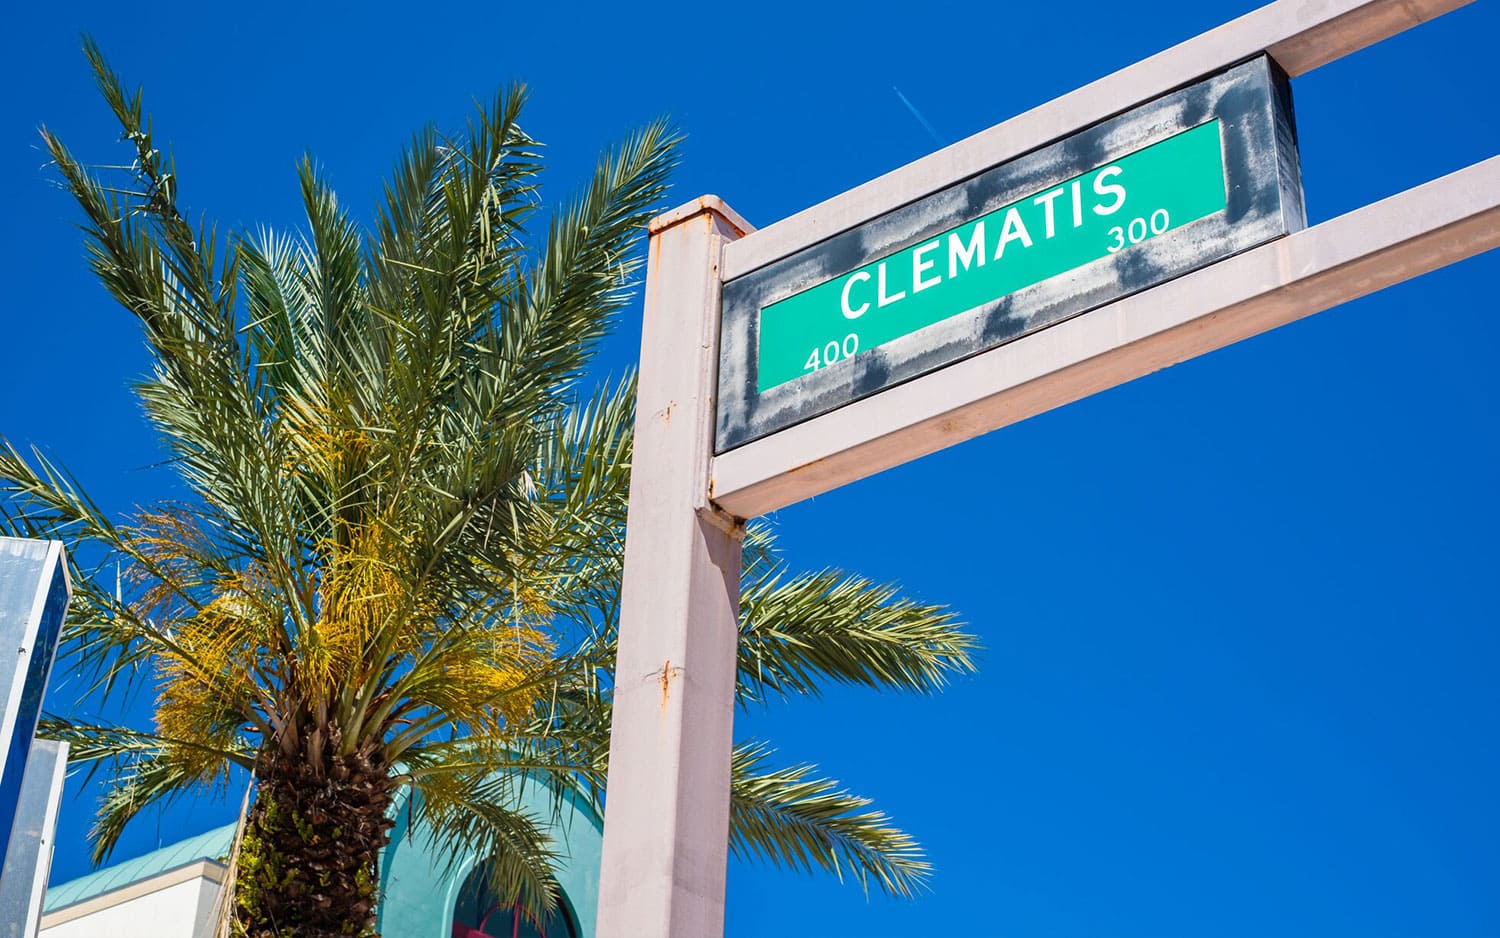 Dine downtown: Clematis Street is delicious spot for Florida foodies to eat.